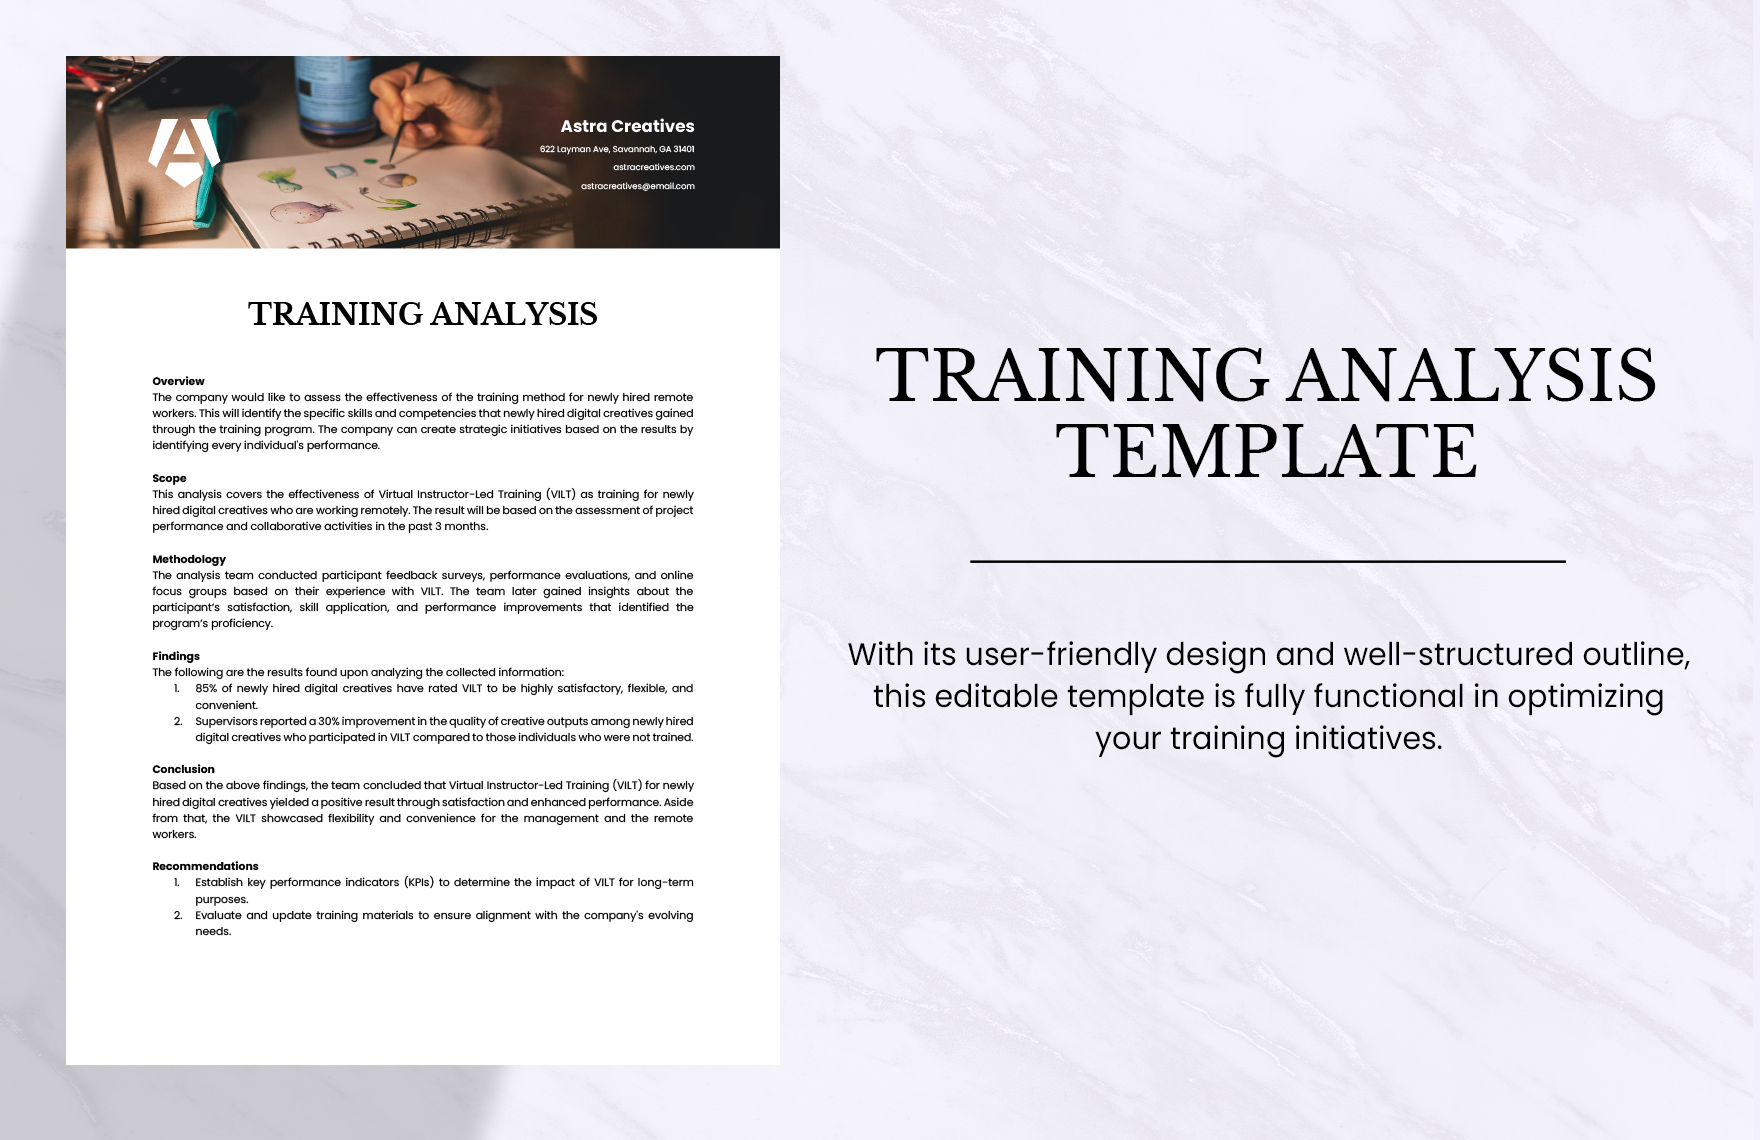 Training Analysis Template in Word, Google Docs